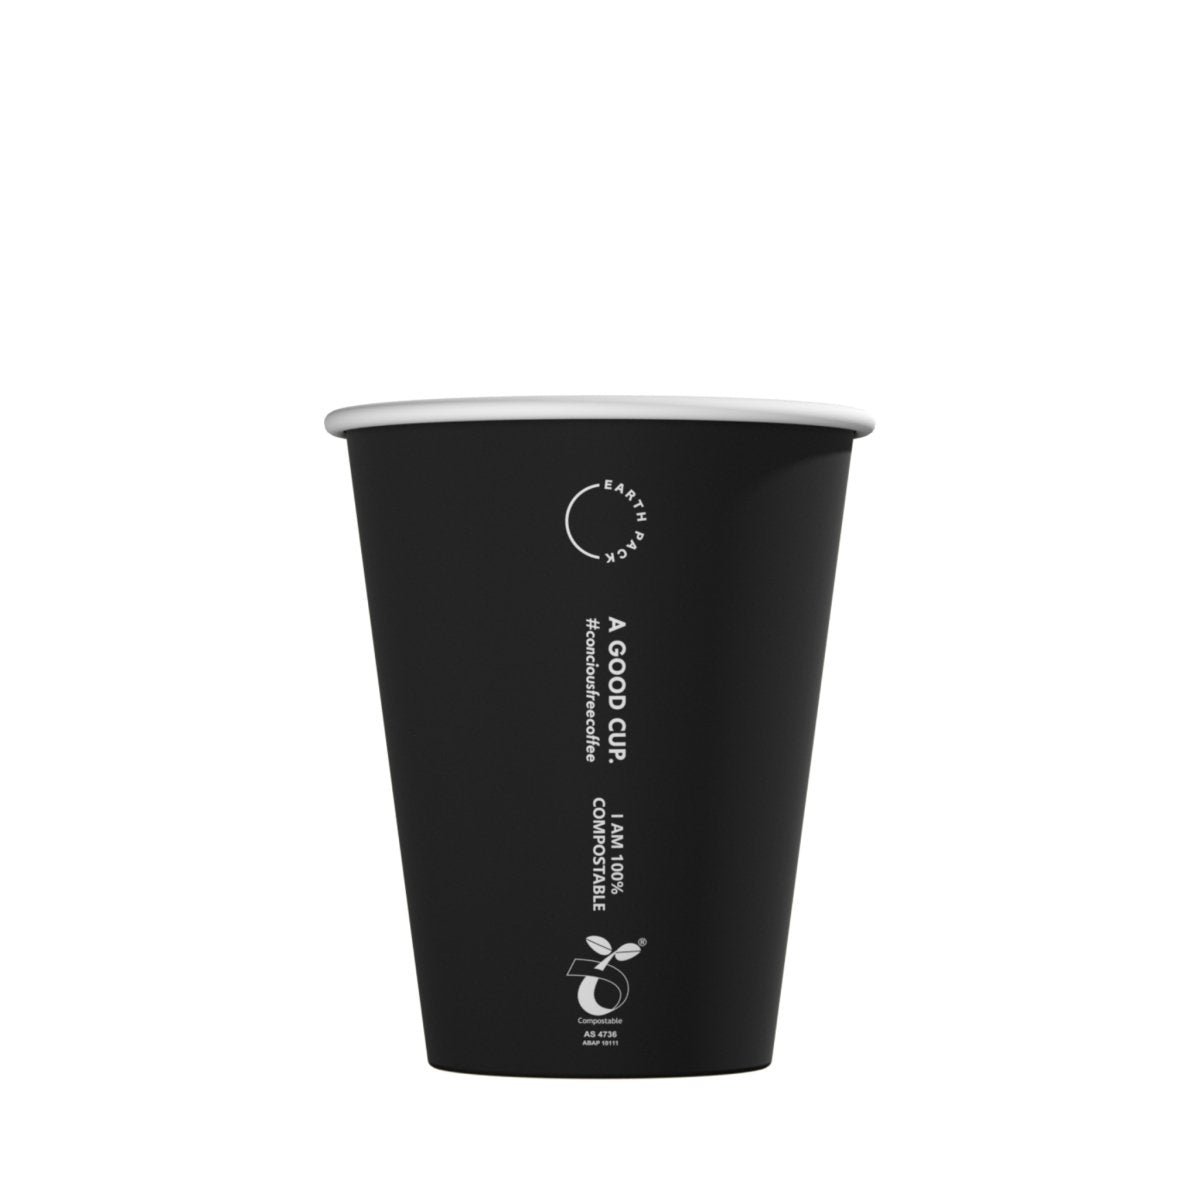 Black Compostable Coffee Cup